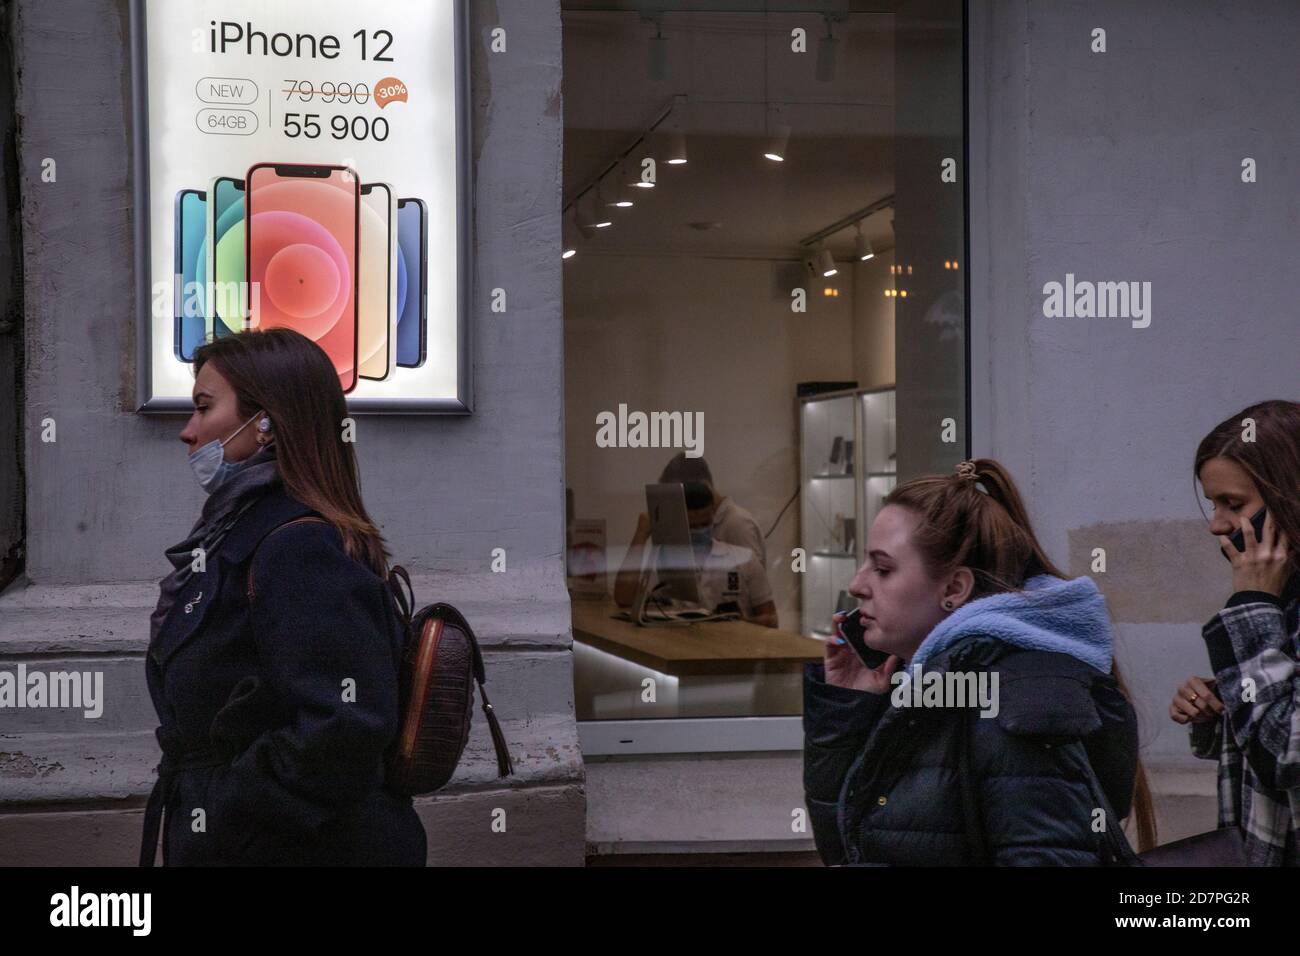 Moscow, Russia. 25th of October, 2020 A sign advertising the sale of a new iPhone 12 phone model at the entrance to an electronics store in Moscow, Russia Stock Photo